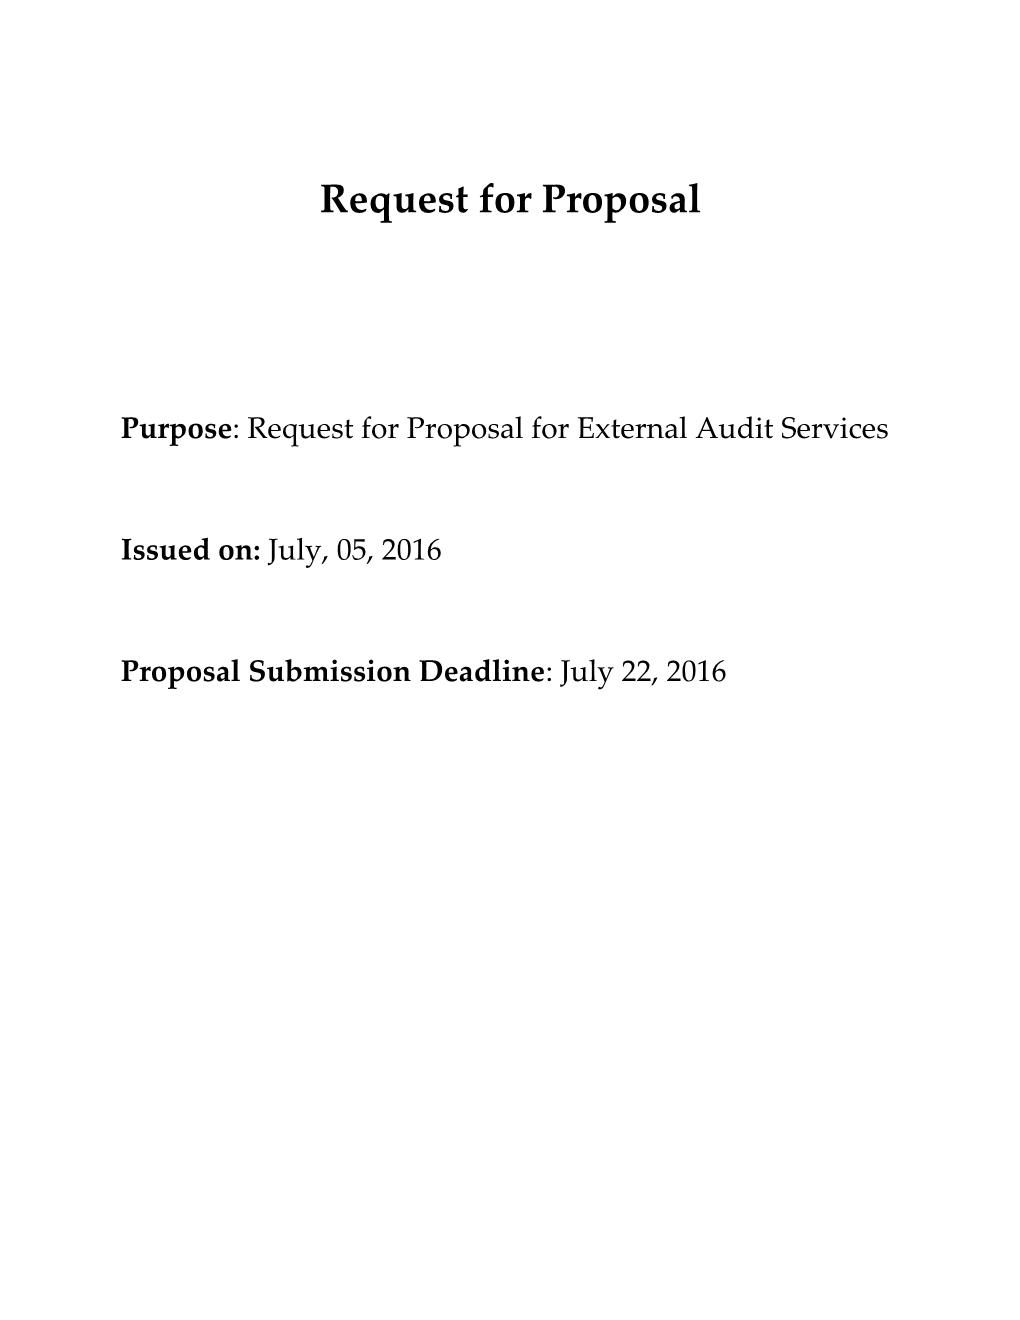 Purpose: Request for Proposal for External Audit Services